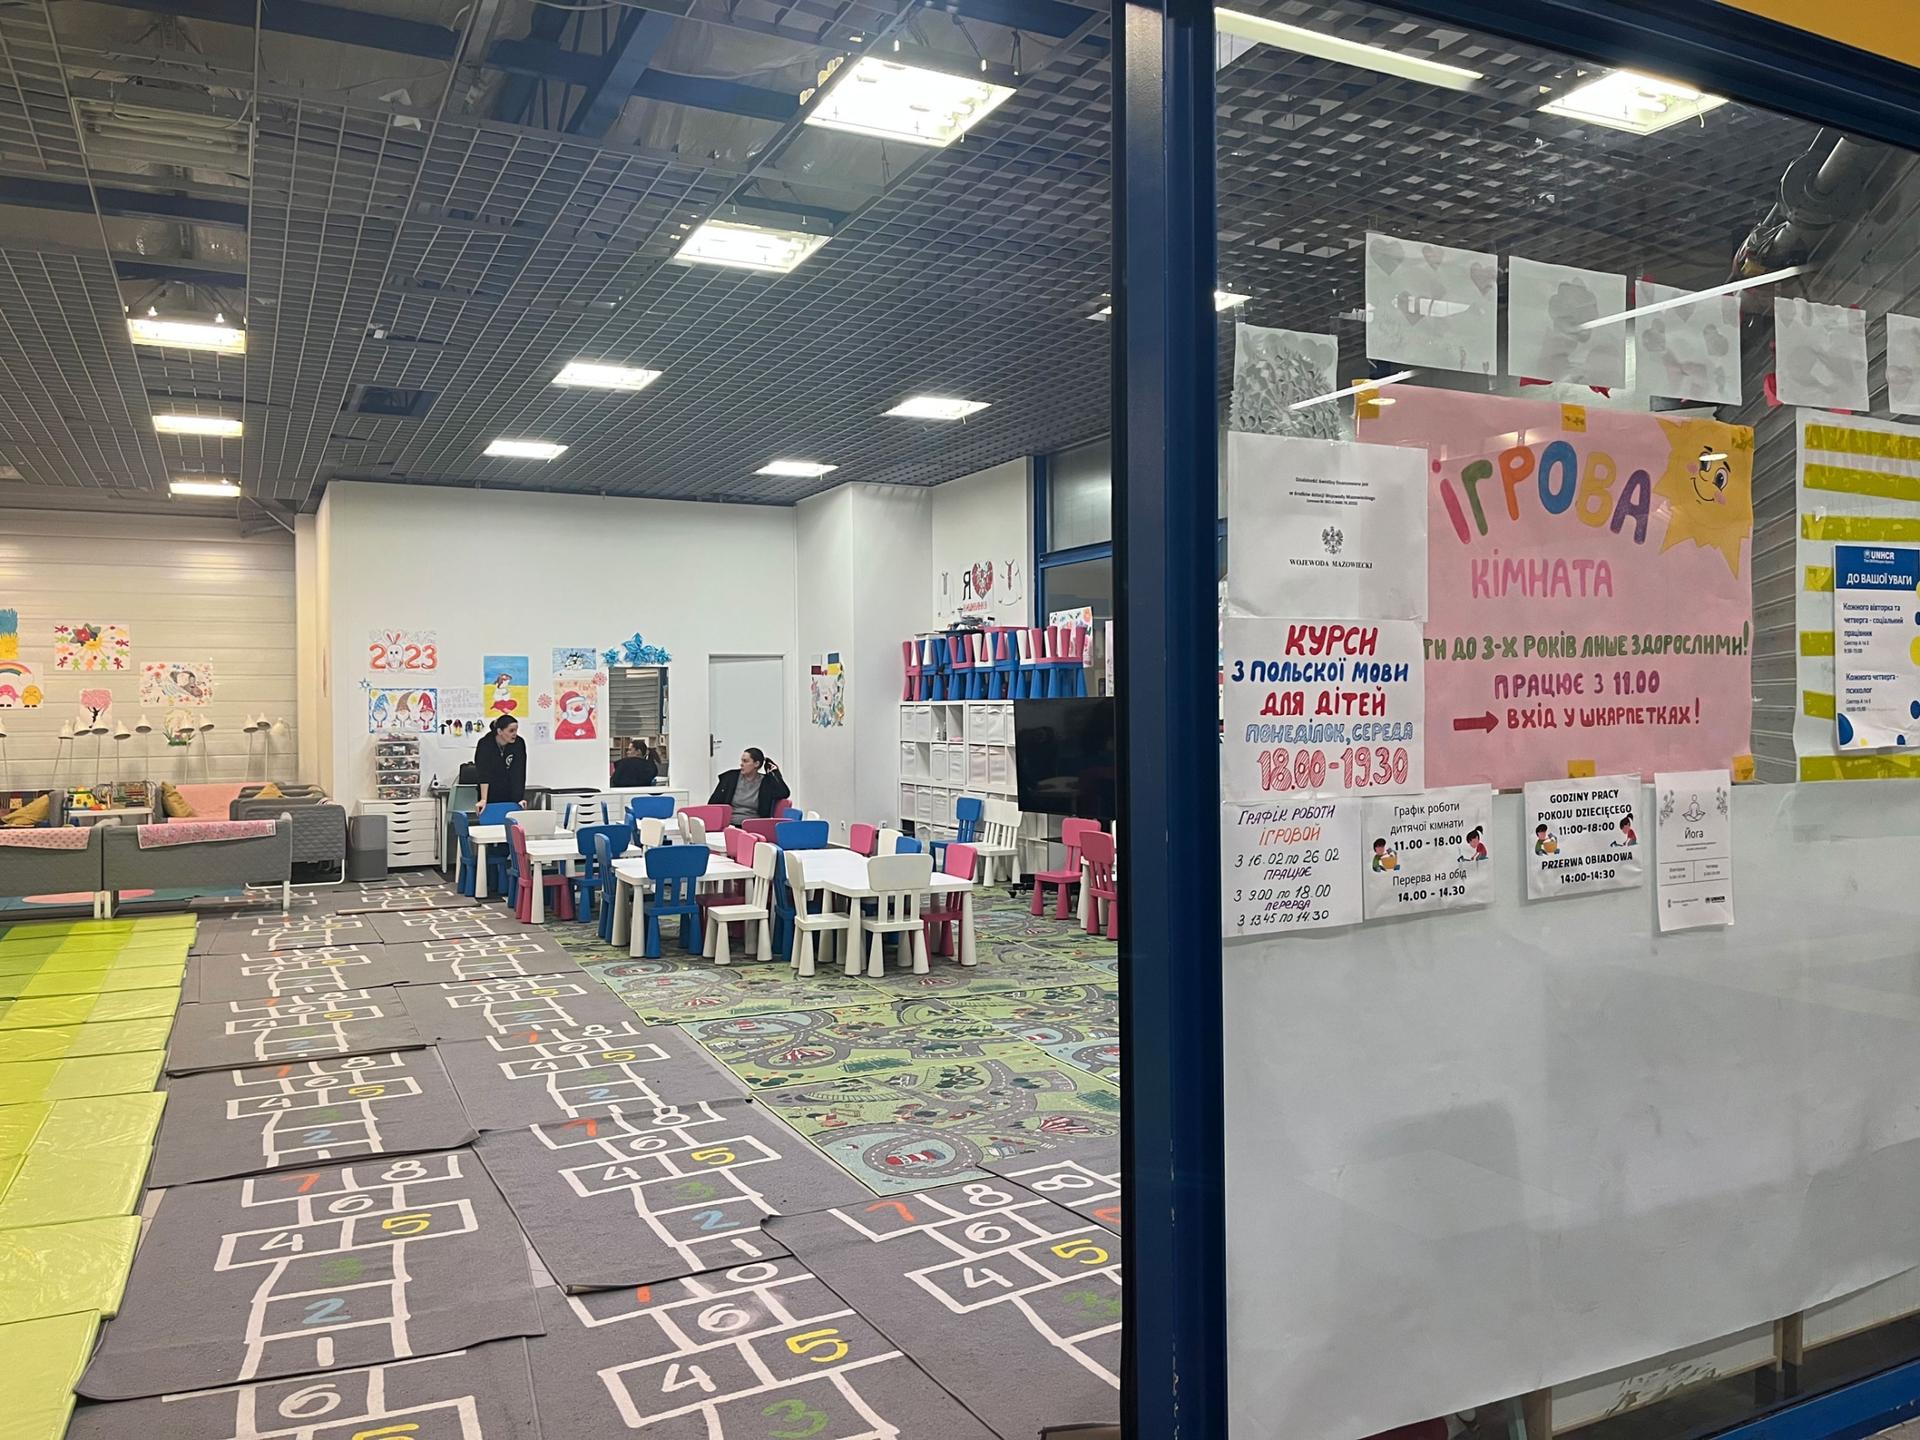 A children's playroom at the PTAK Warsaw Expo Center. 